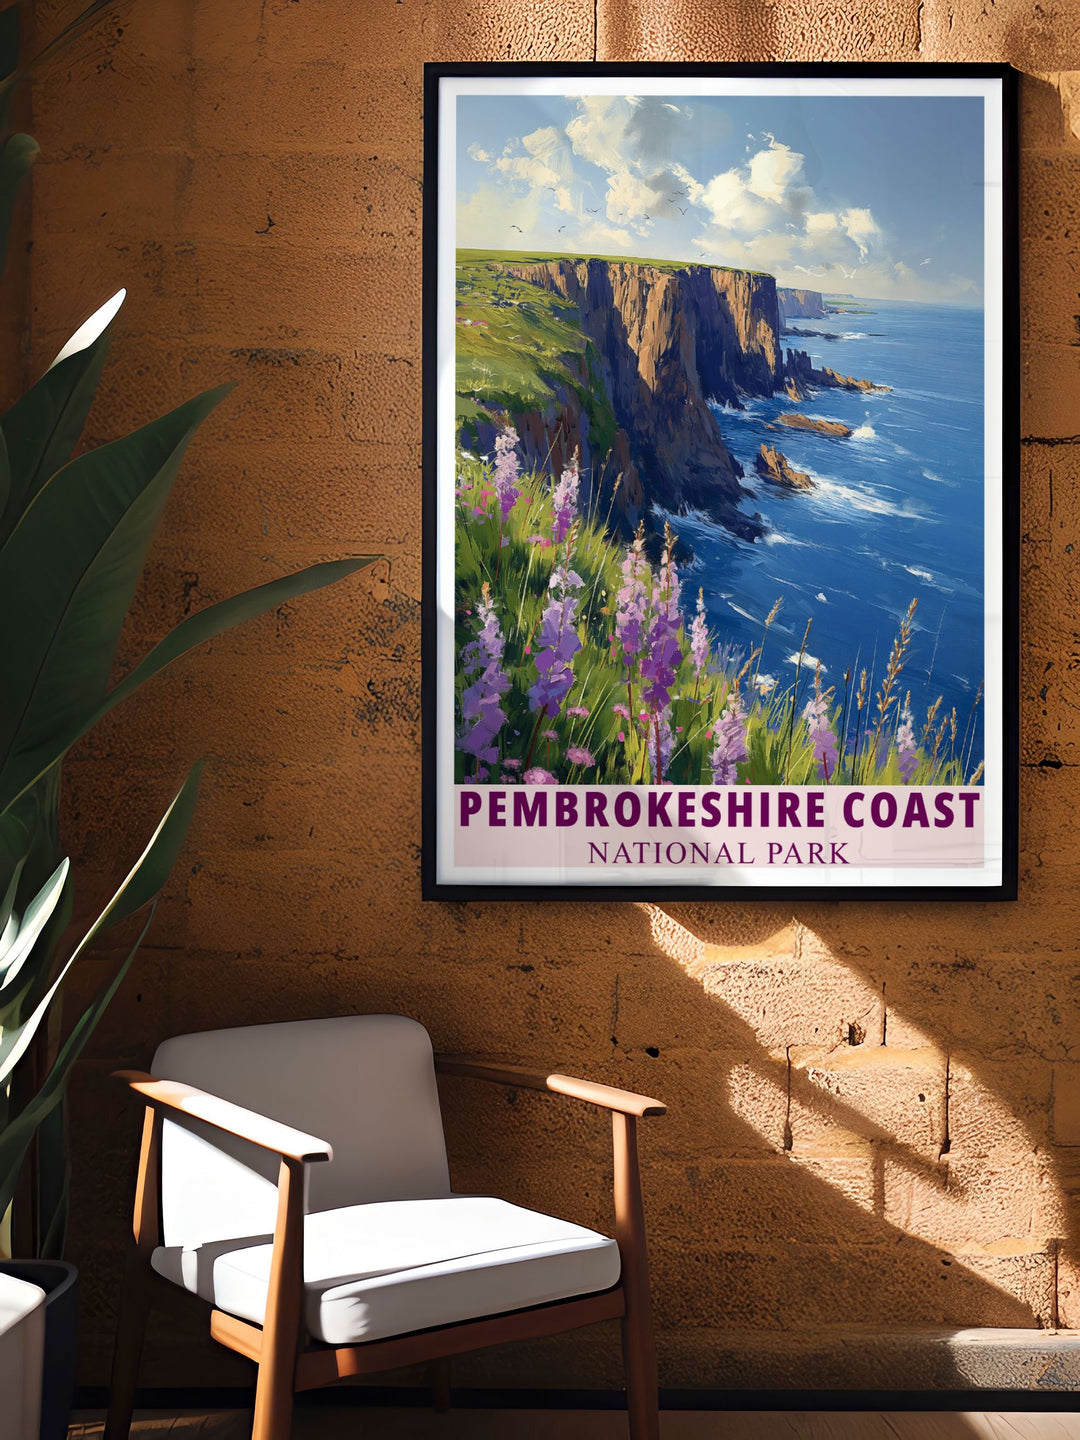 Art Deco Print enthusiasts will love our Pembrokeshire Coast series, which blends vintage aesthetics with contemporary design. These prints celebrate the natural beauty of Pembrokeshire, providing a stylish and timeless addition to any art collection.